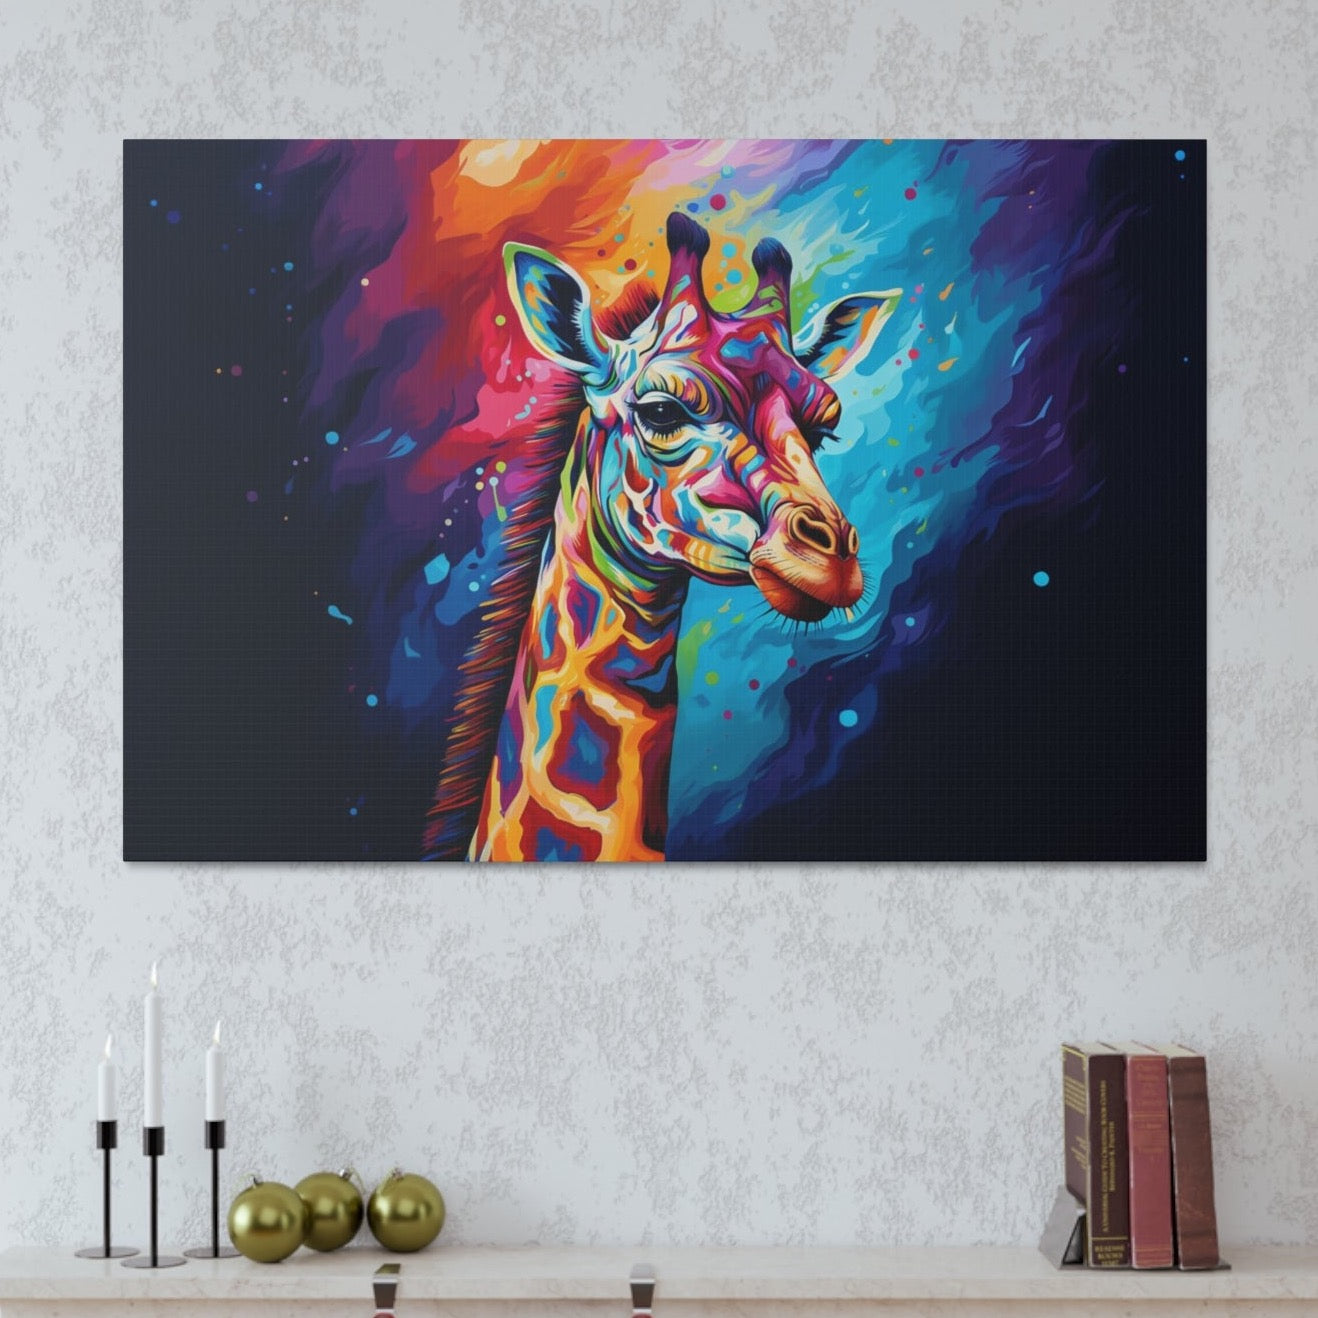 aesthetic giraffes stretched canvas print